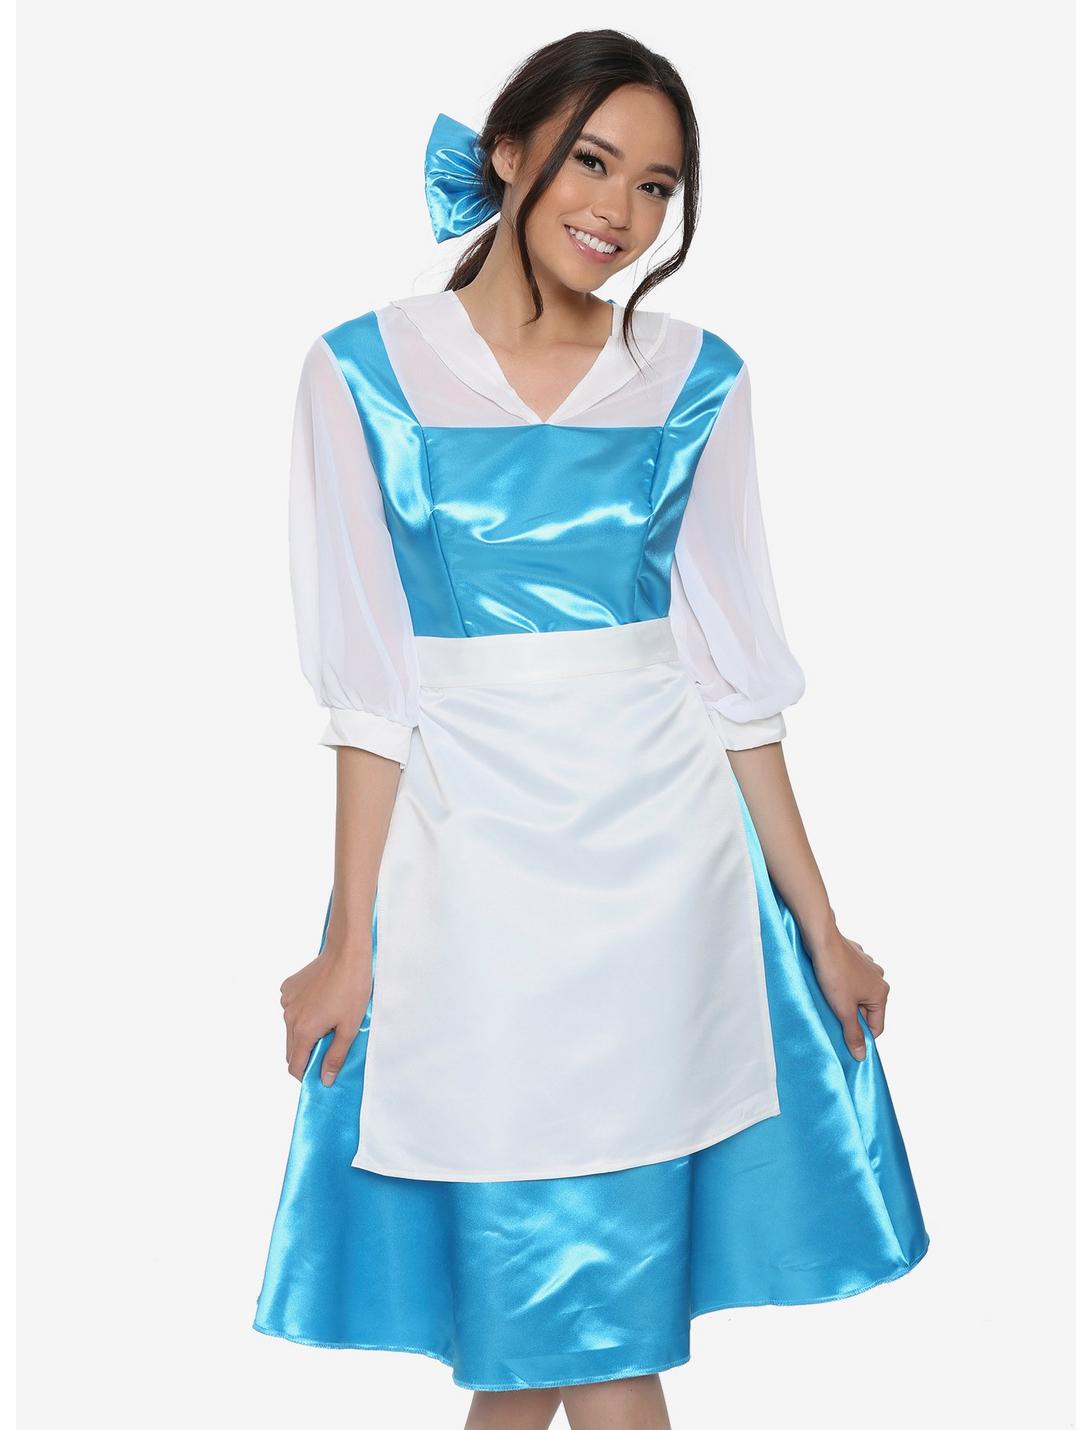 Disney Princess Beauty And The Beast Peasant Belle Deluxe Costume, MULTI, hi-res